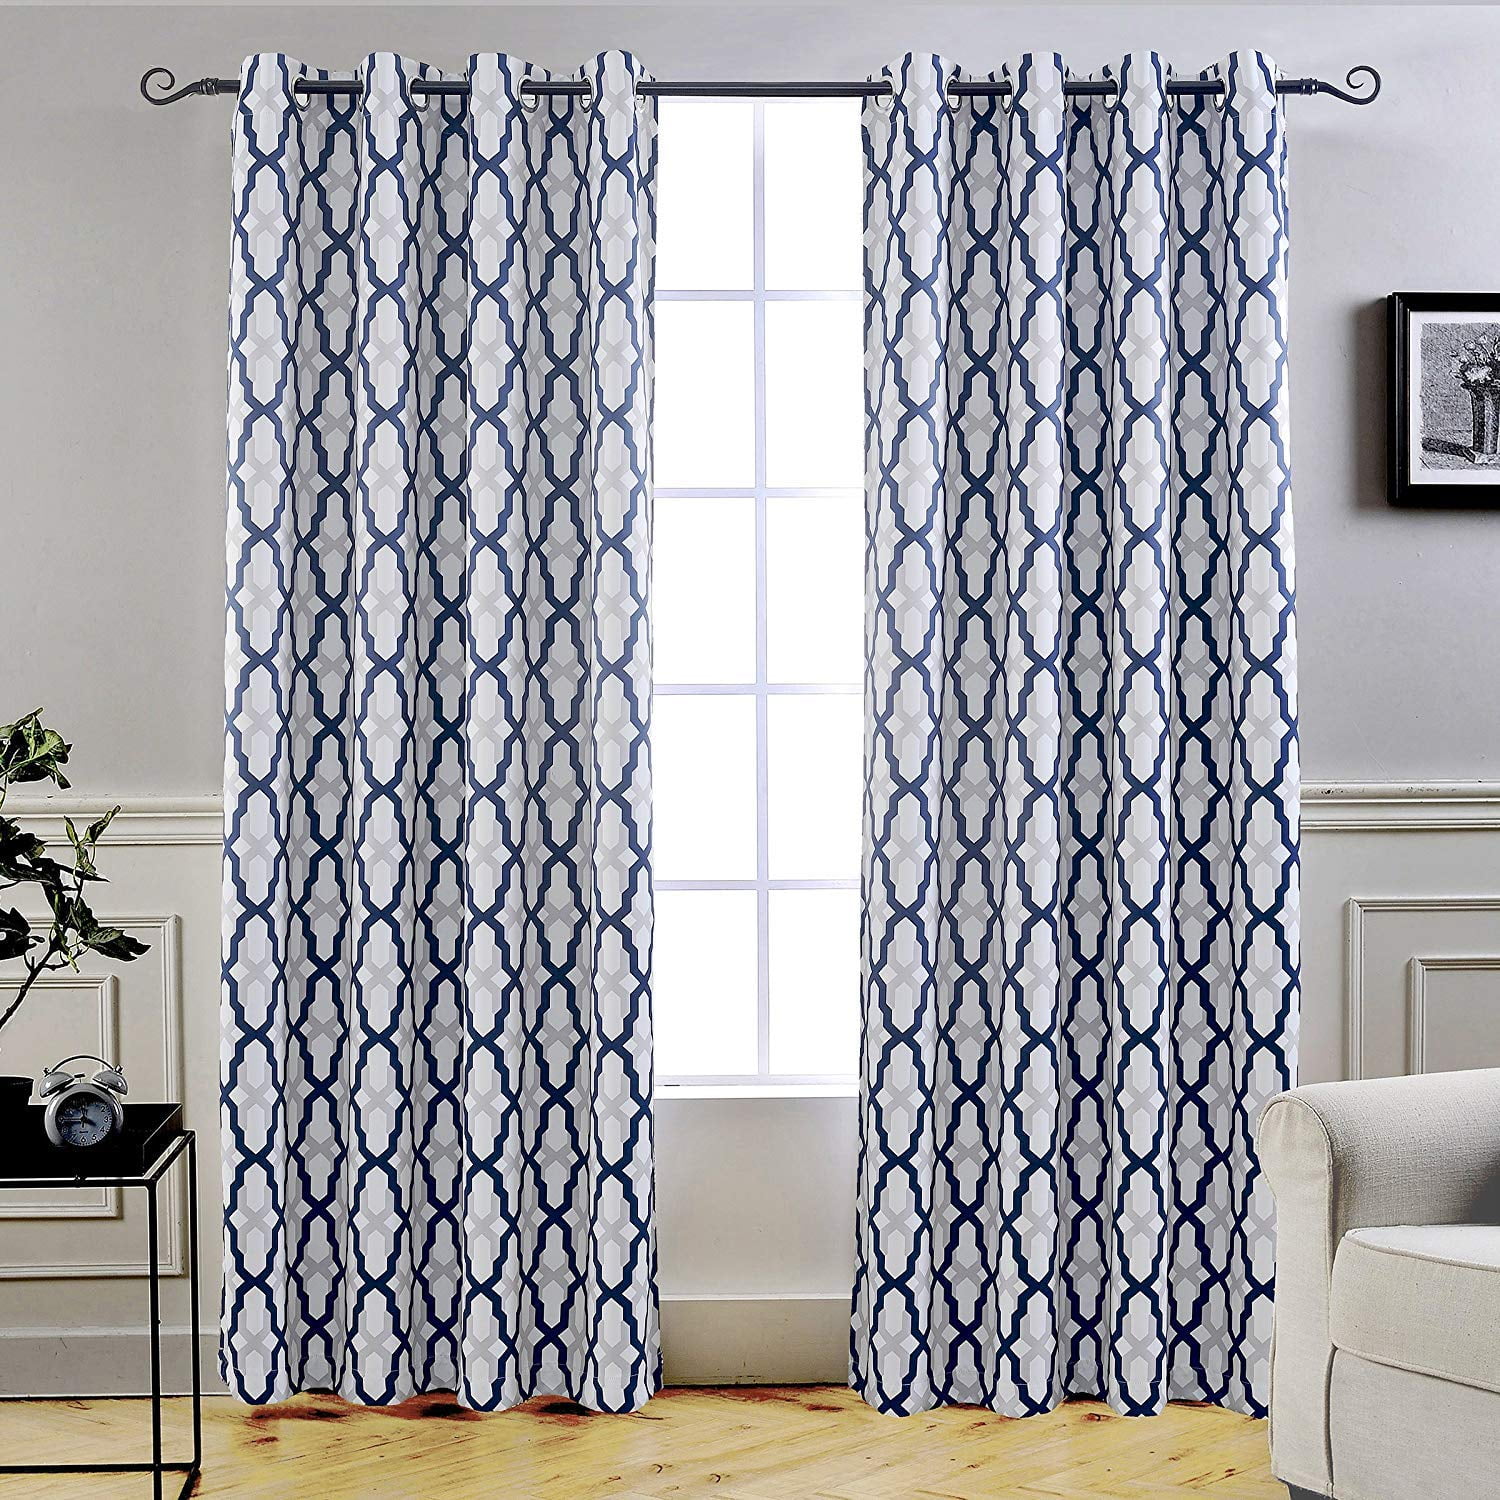 Modern Farmhouse Textured Waves Room Darkening Blackout Curtains, Set of 2,  52 x 108, Charcoal - Blue Nile Mills